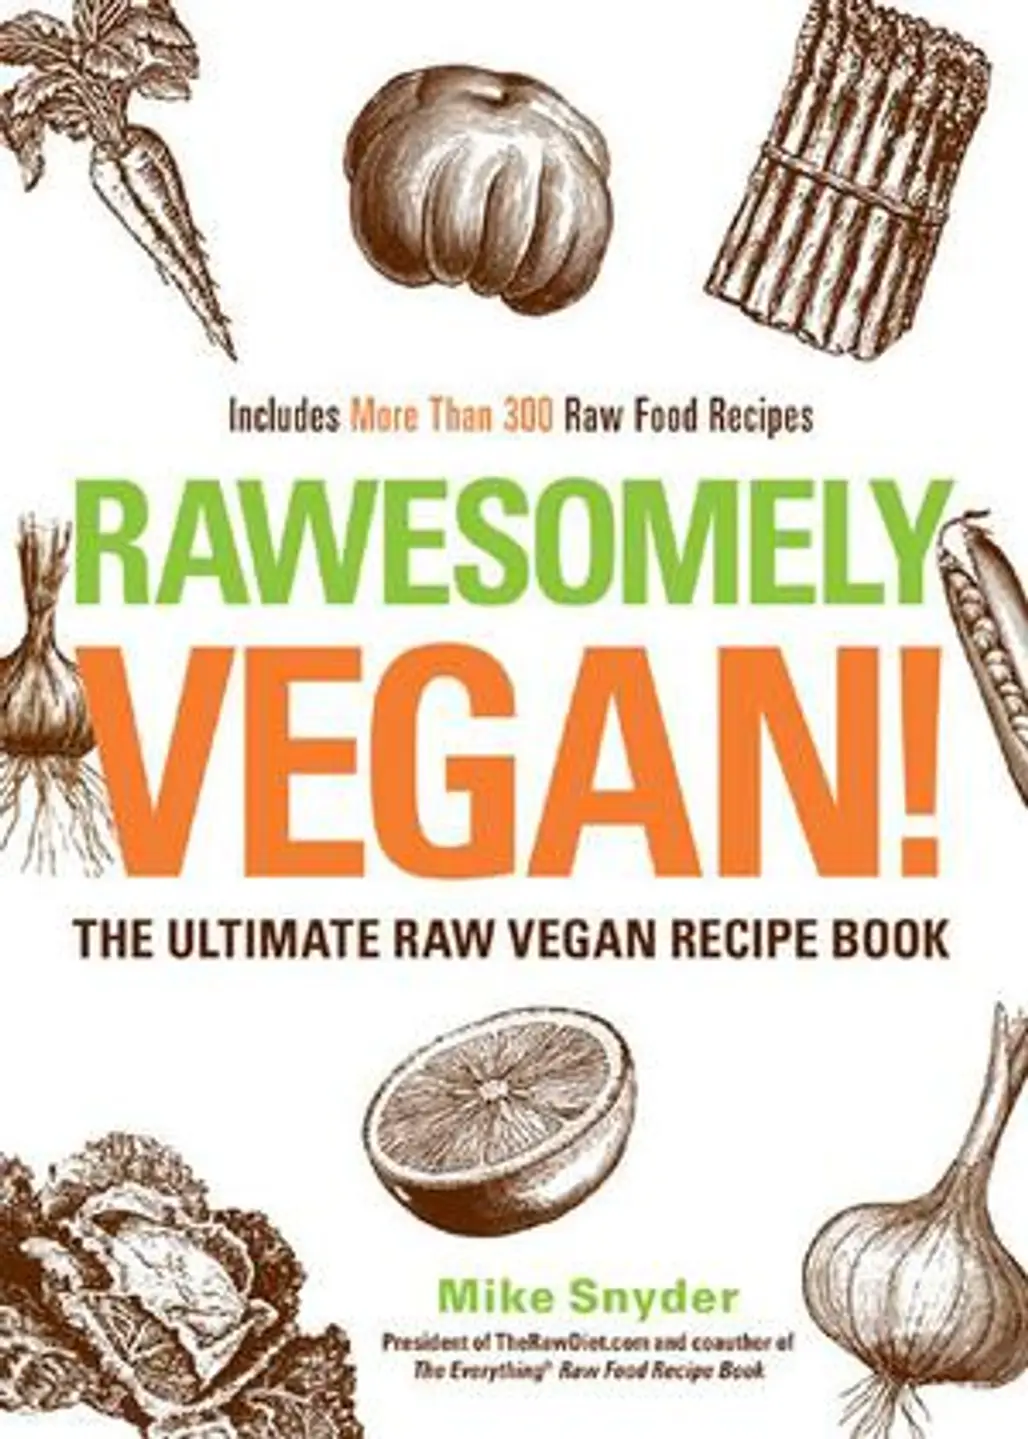 Rawsomely Vegan!:the Ultimate Raw Vegan Recipe Book by Mike Snyder